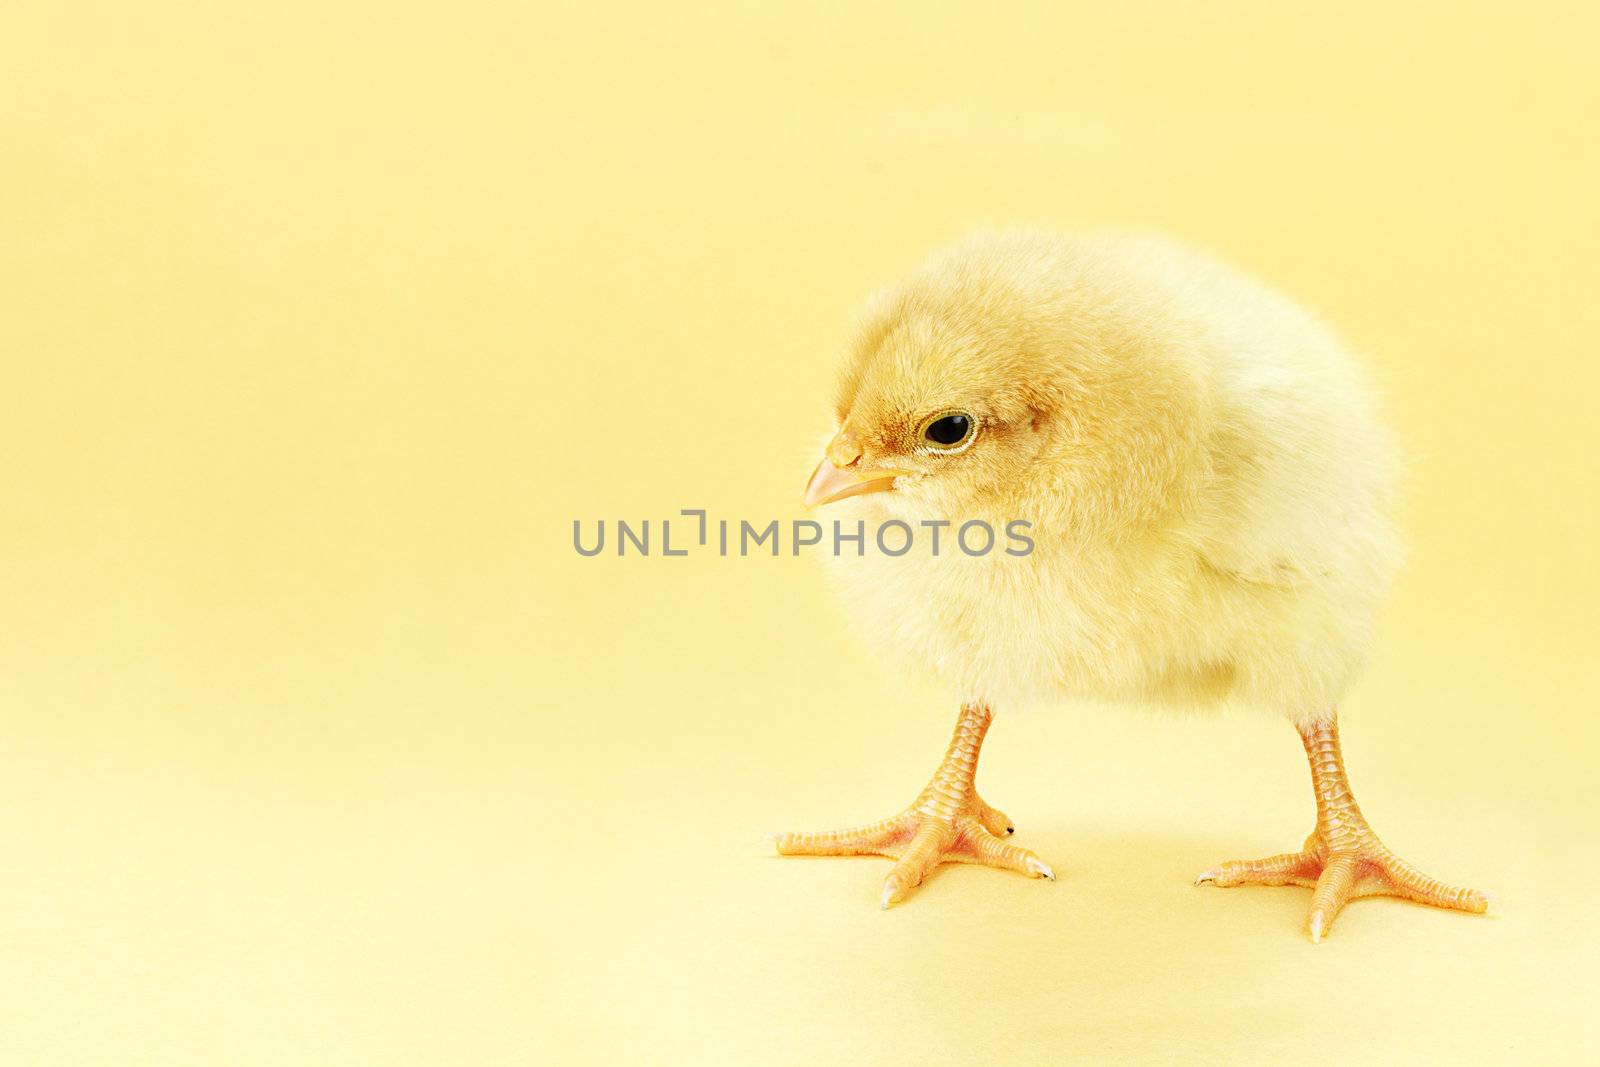 Chick On Yellow Background by StephanieFrey